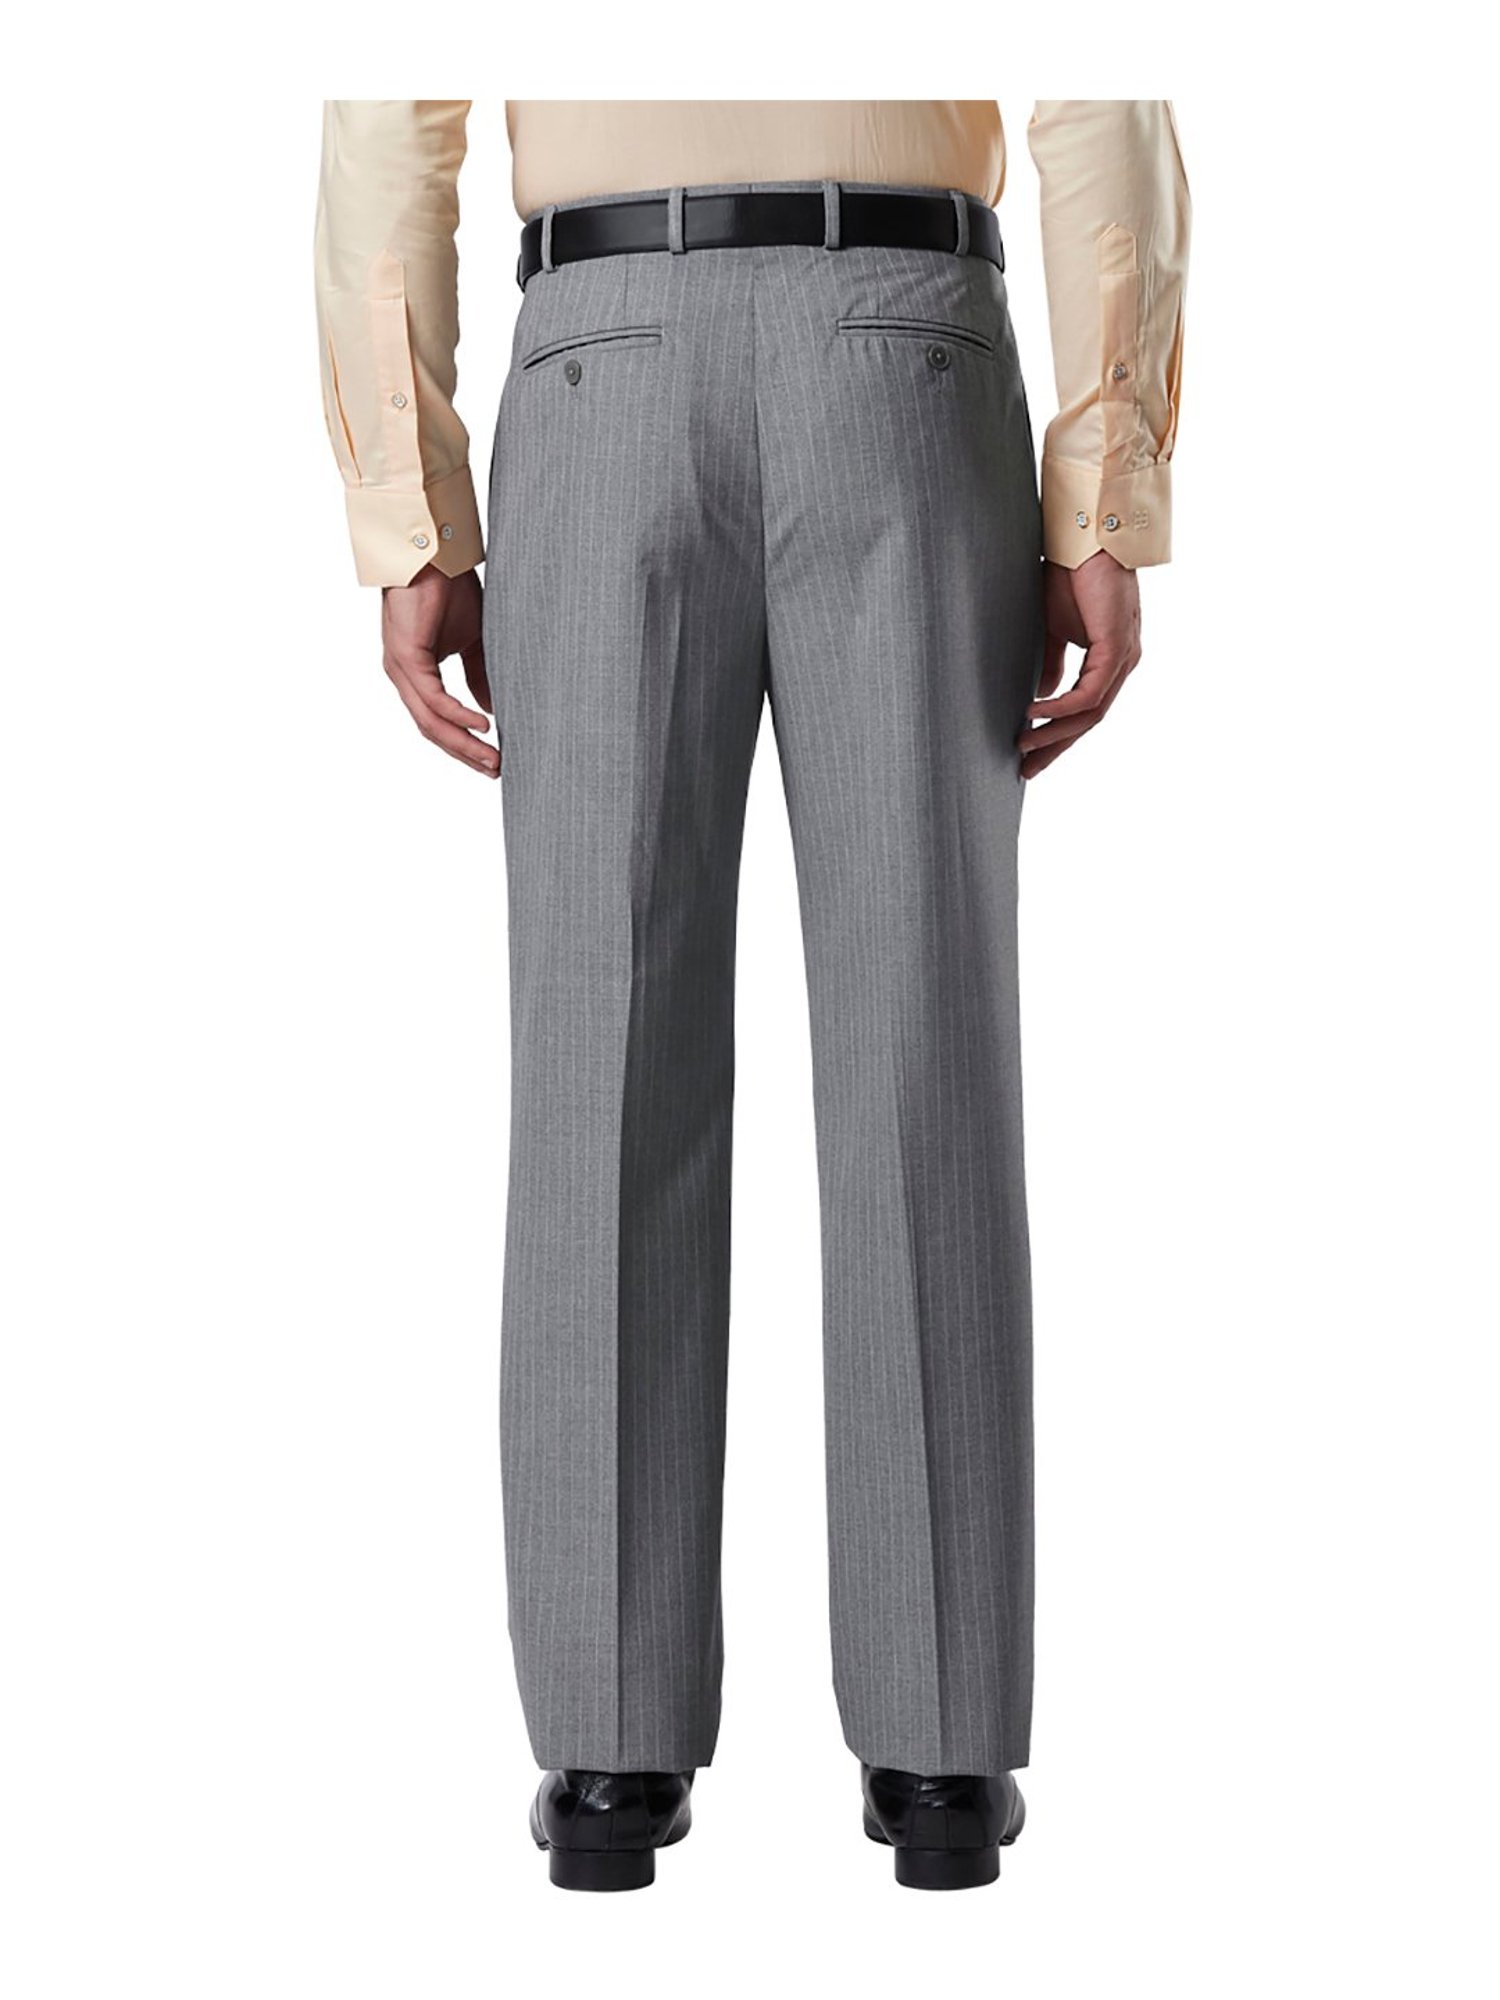 Buy VKMarotia Solid Formal Plate Front Trouser Pant Combo for Men Regular  fit Dual Pleated Polyester viscouse Gents Trousers for Office interviews  Pack of 2 from Size 30 to 44 at Amazonin